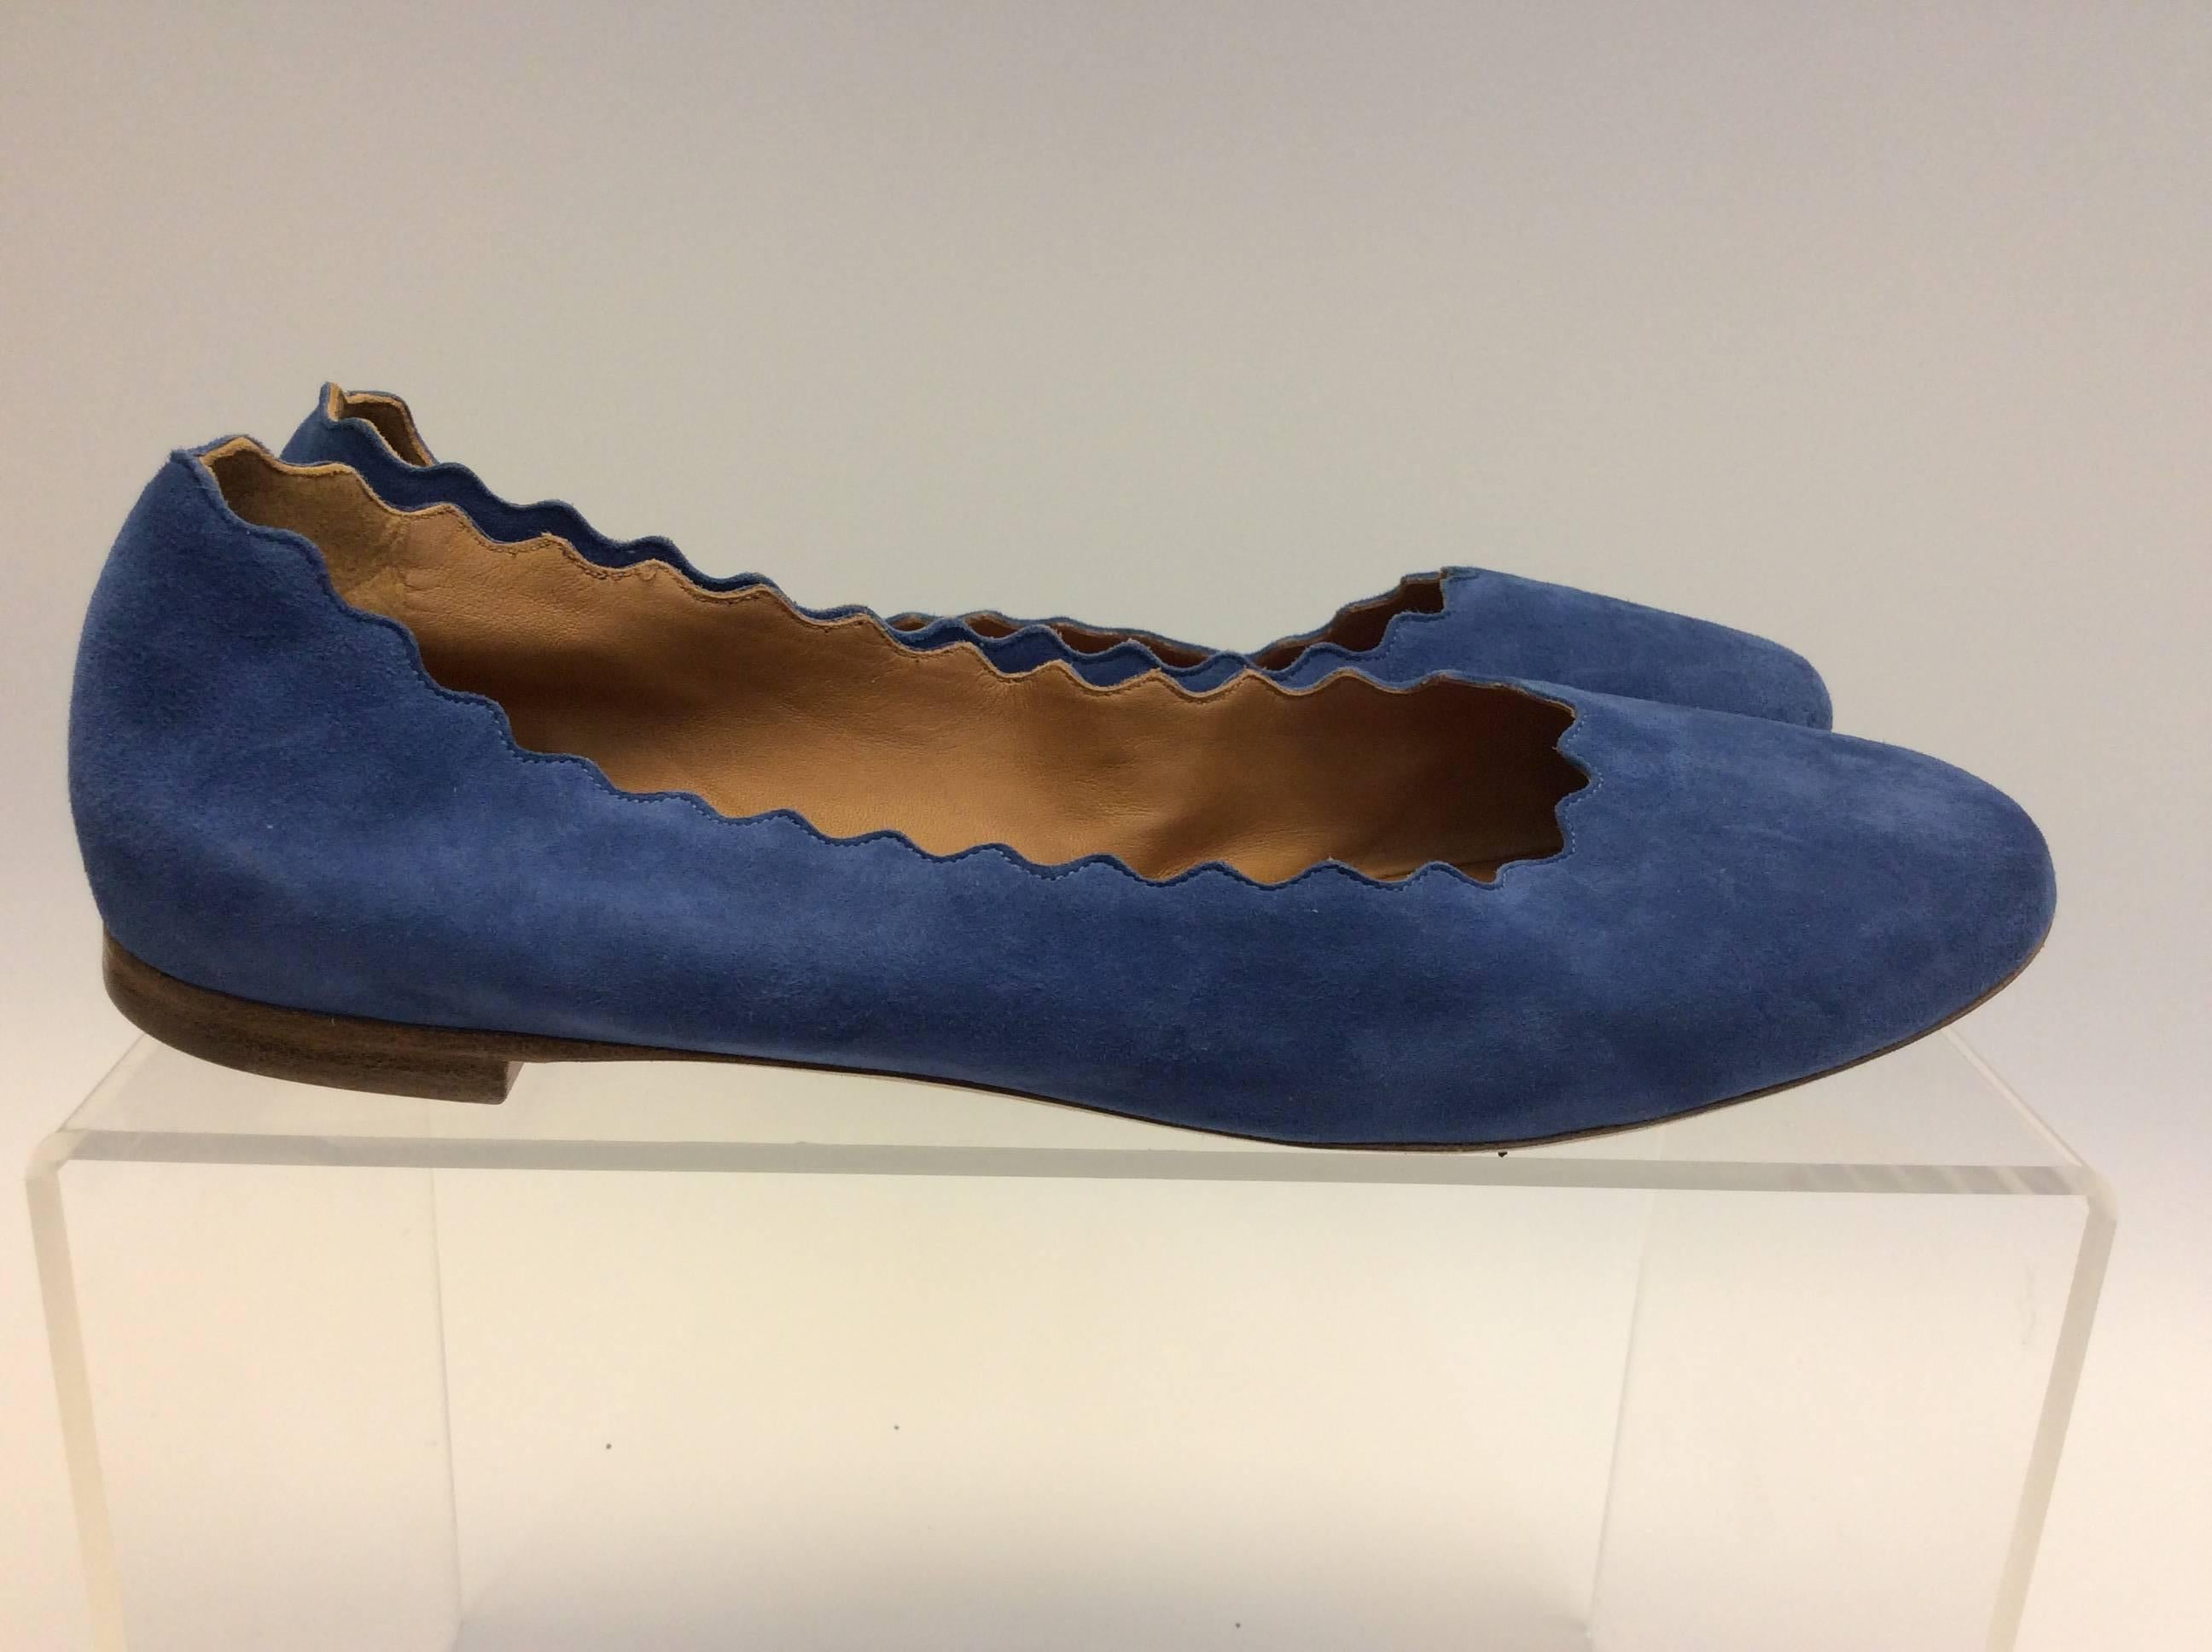 Chloe Blue Suede Flats In New Condition For Sale In Narberth, PA